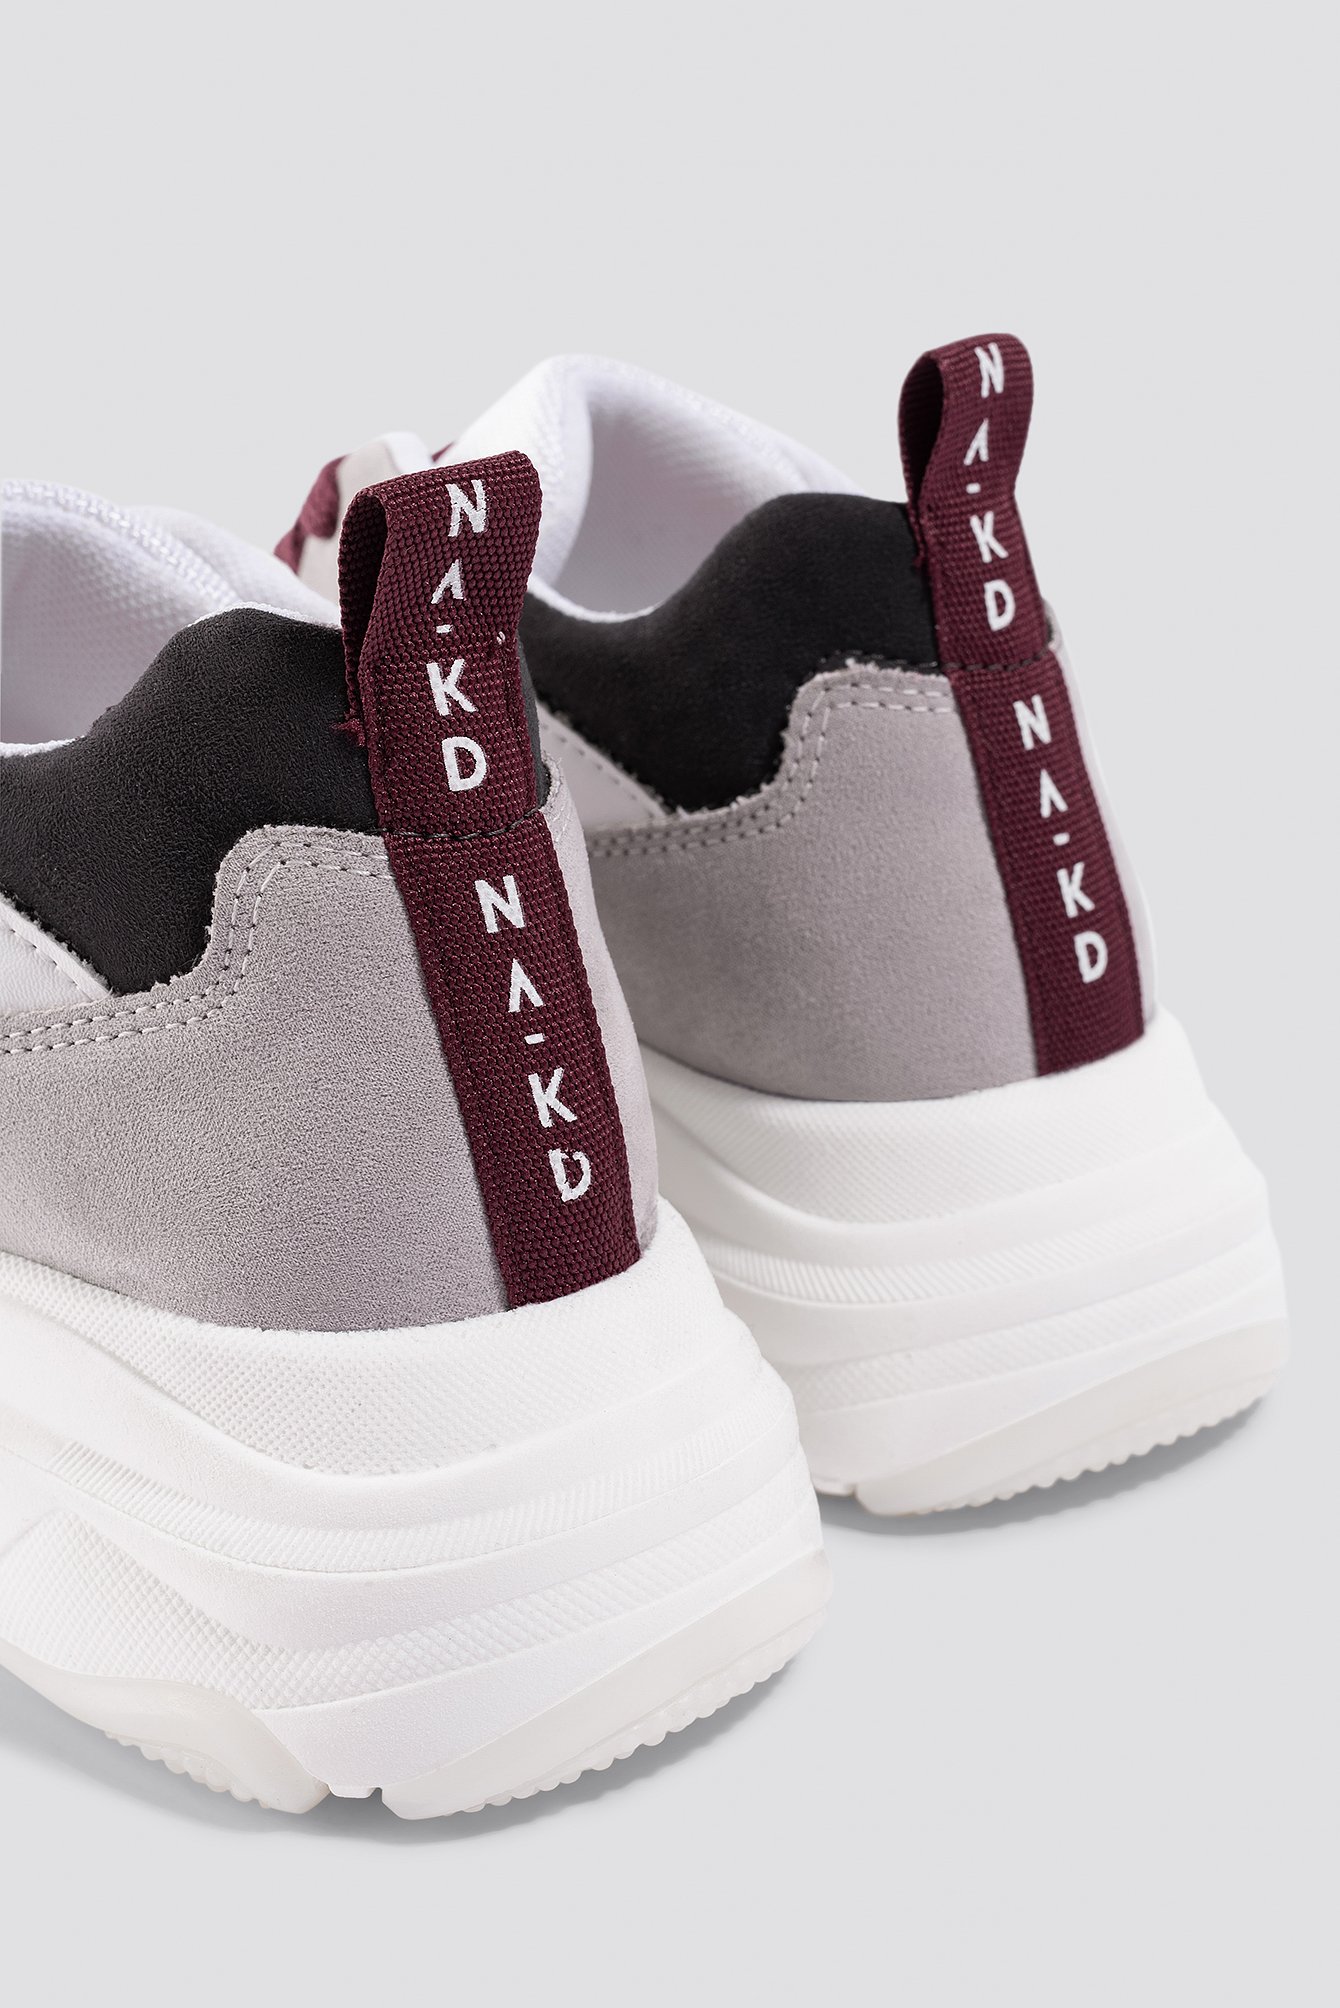 nakd trainers